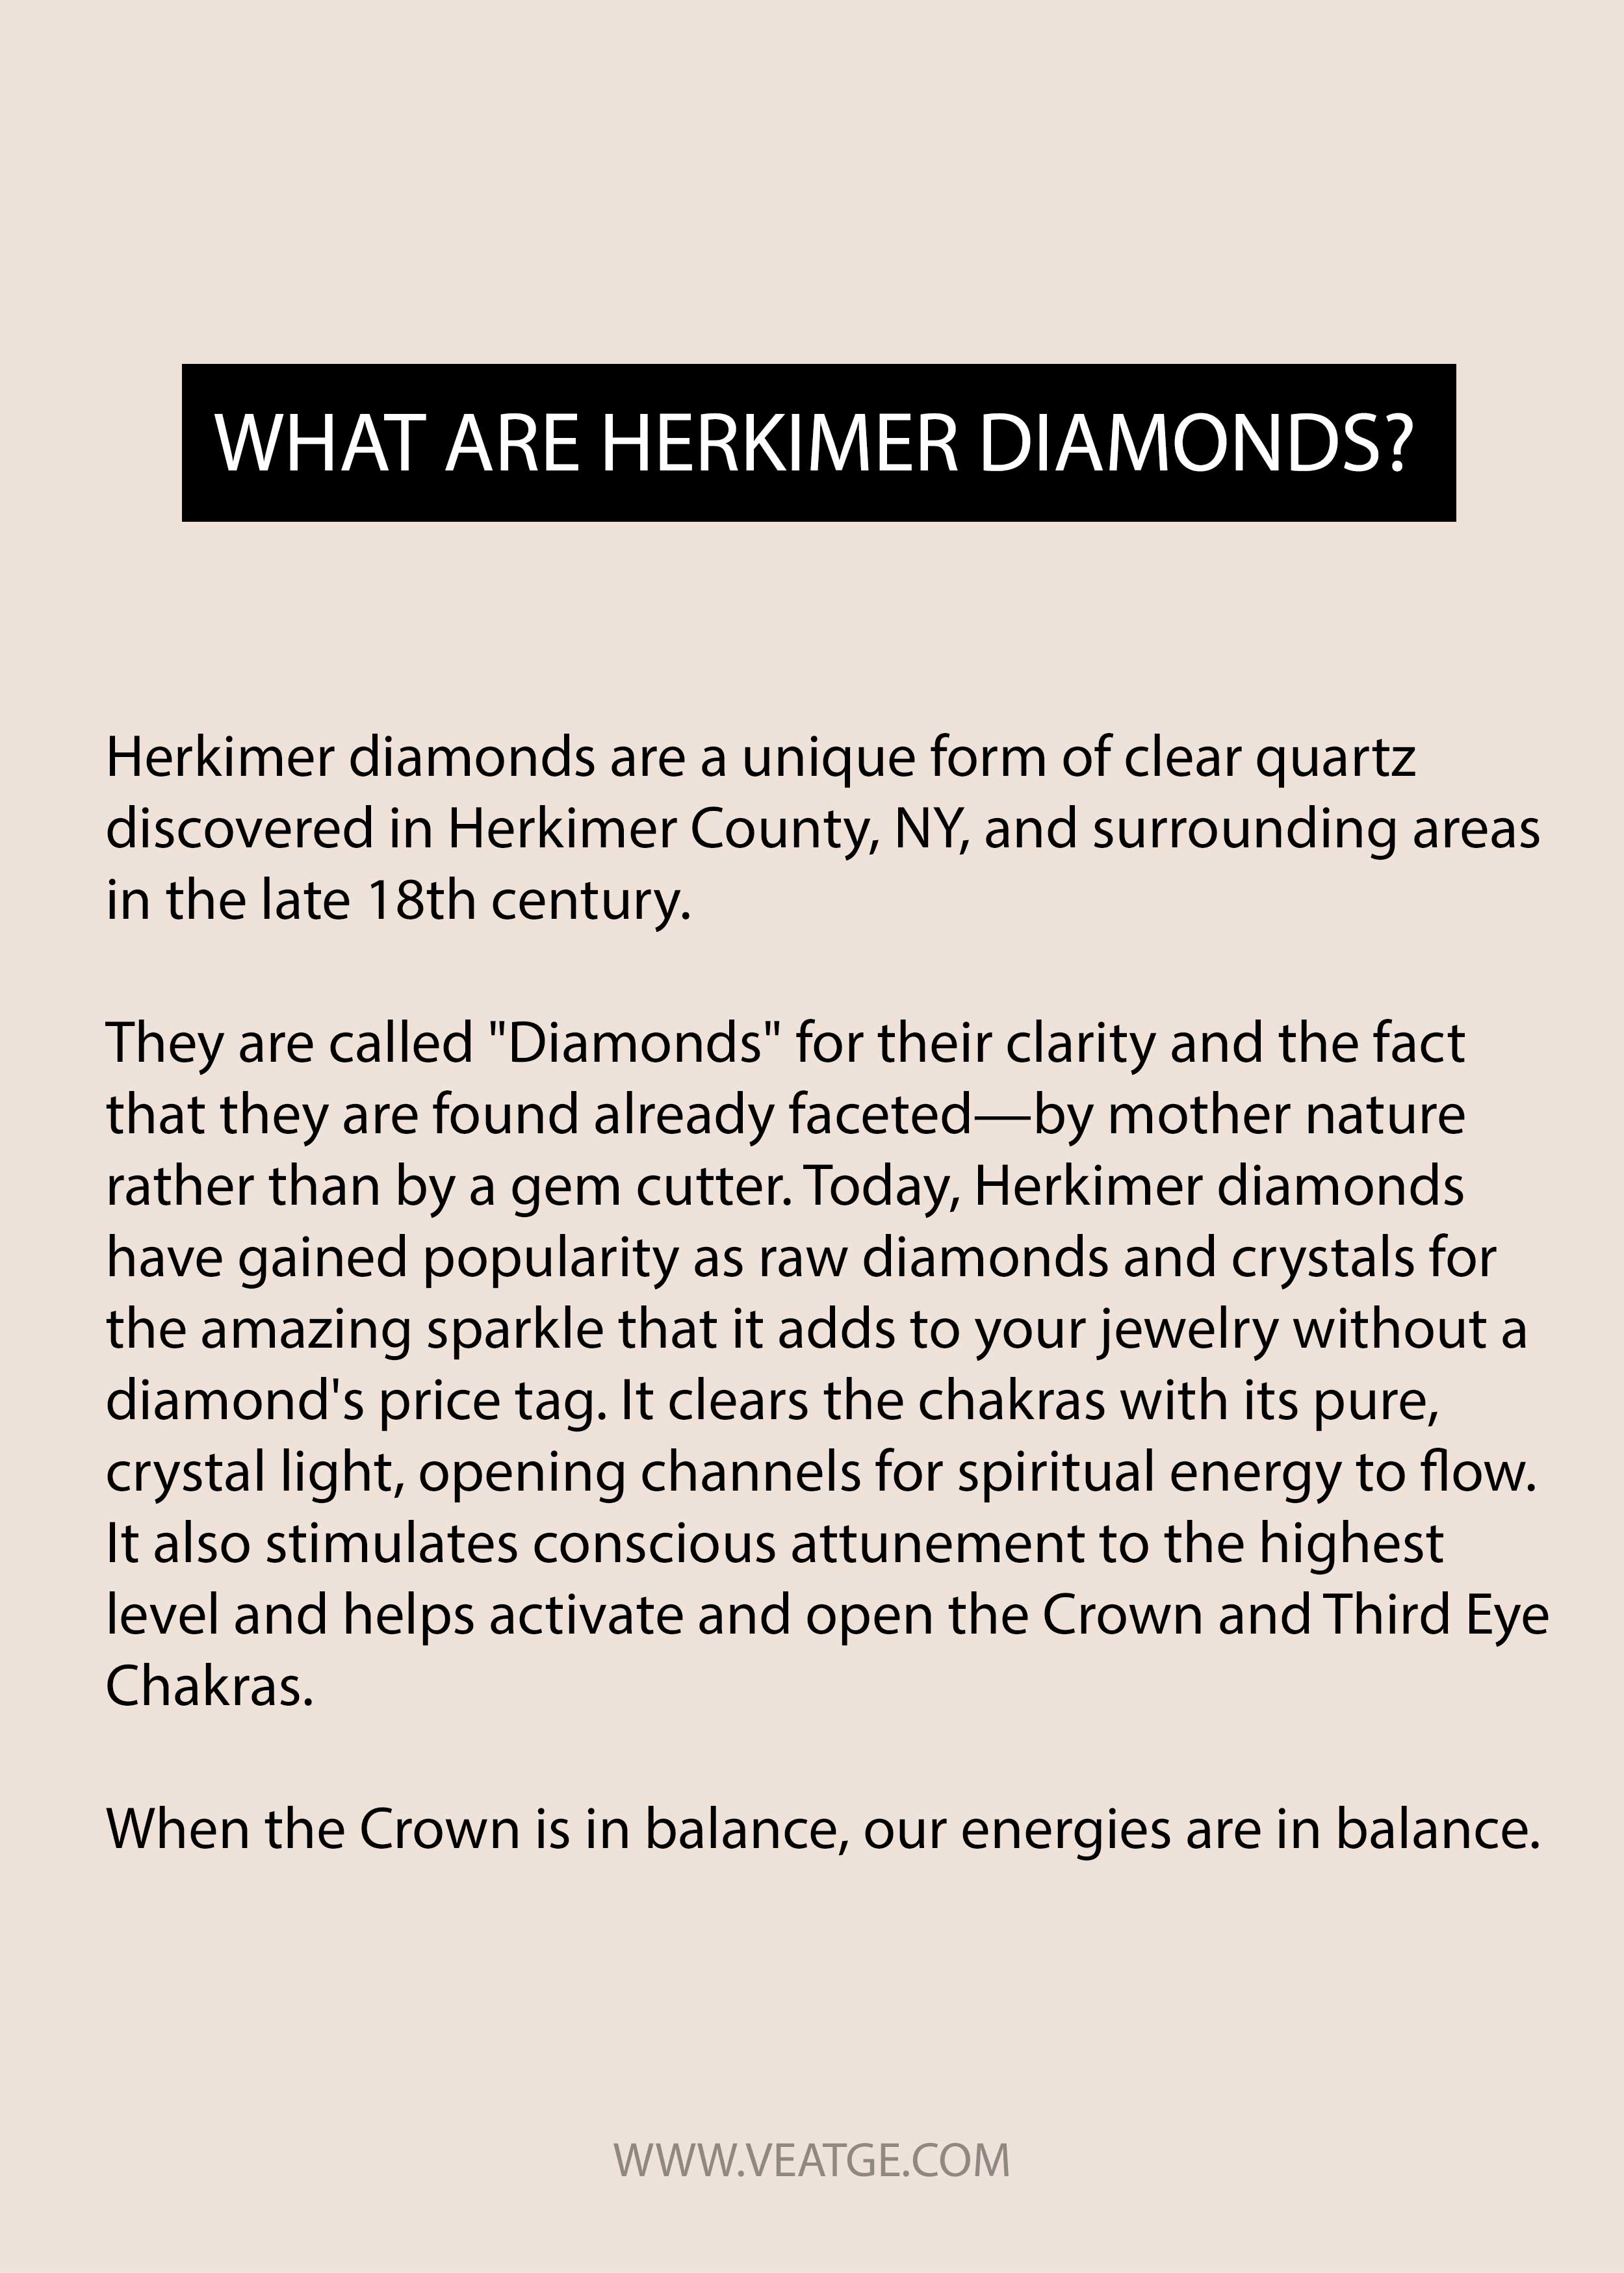 what is herkimer diamond, what are herkimer diamonds, where are herkimer diamonds found, are herkimer diamonds real diamonds?